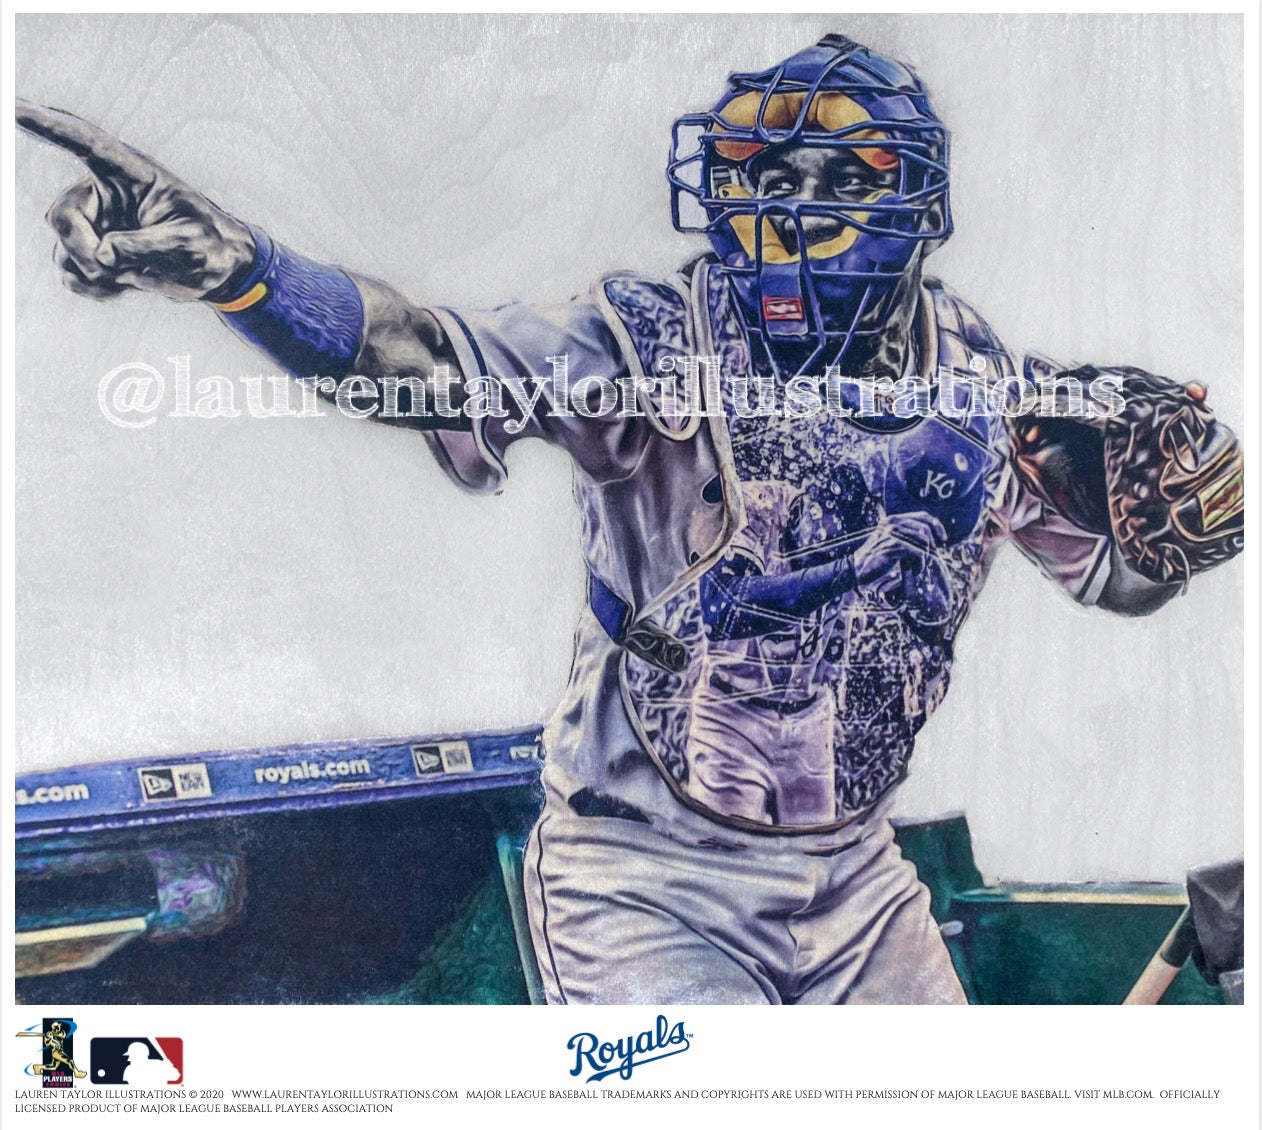 "Salvy" (Salvador Perez) Kansas City Royals - Officially Licensed MLB Print - Limited Release